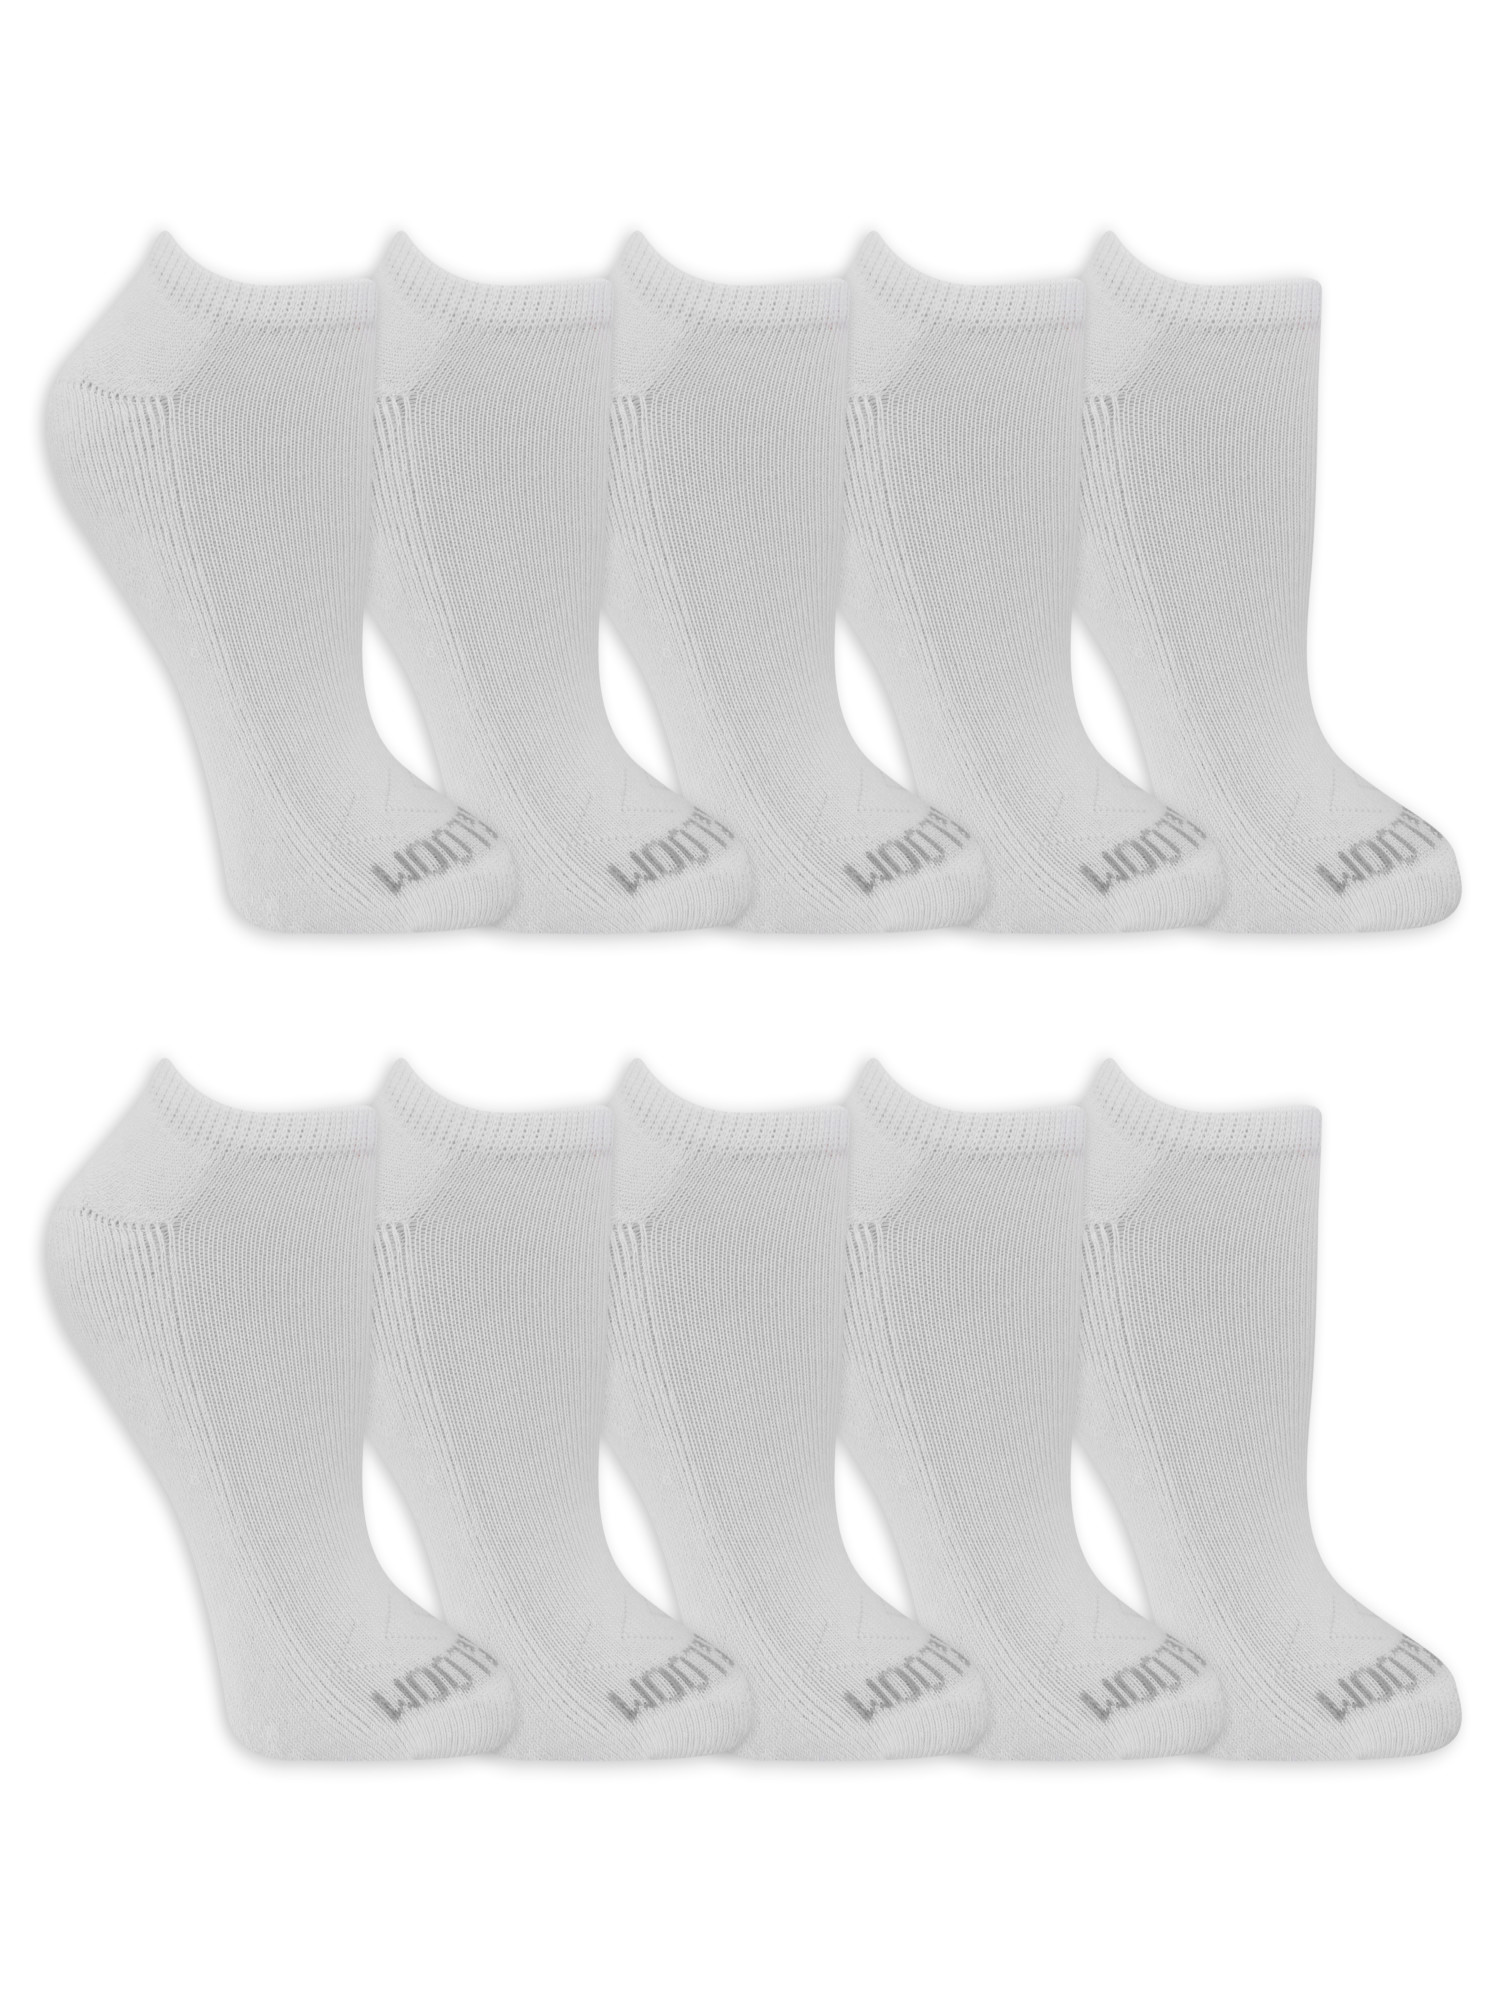 Fruit of the Loom Womens Everyday Soft Cushioned No Show Socks, 10-Pack - image 4 of 5